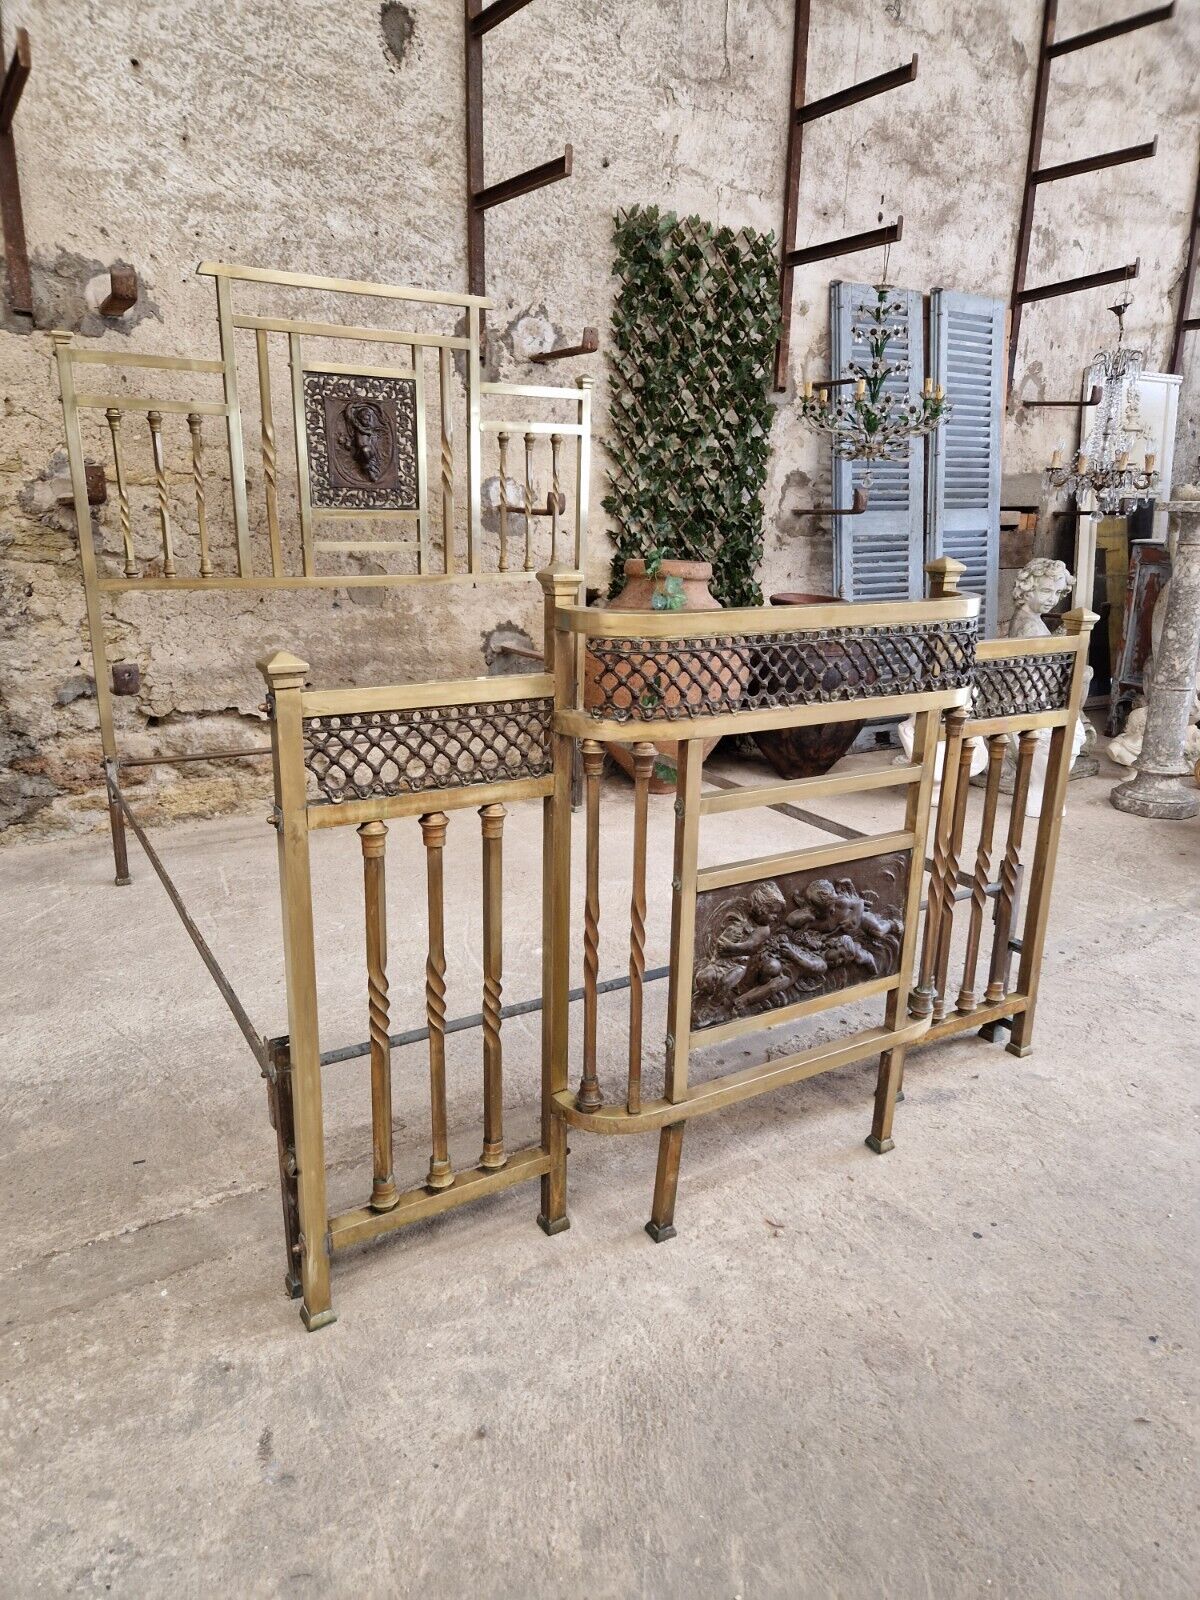 We are delighted to offer for sale this Stunning Liberty Brass Bed

This Antique Italian Brass Bed from the Art Nouveau Period, combines elegance and style with its intricate design and stunning bronzed colour. The rectangular shape of the bed